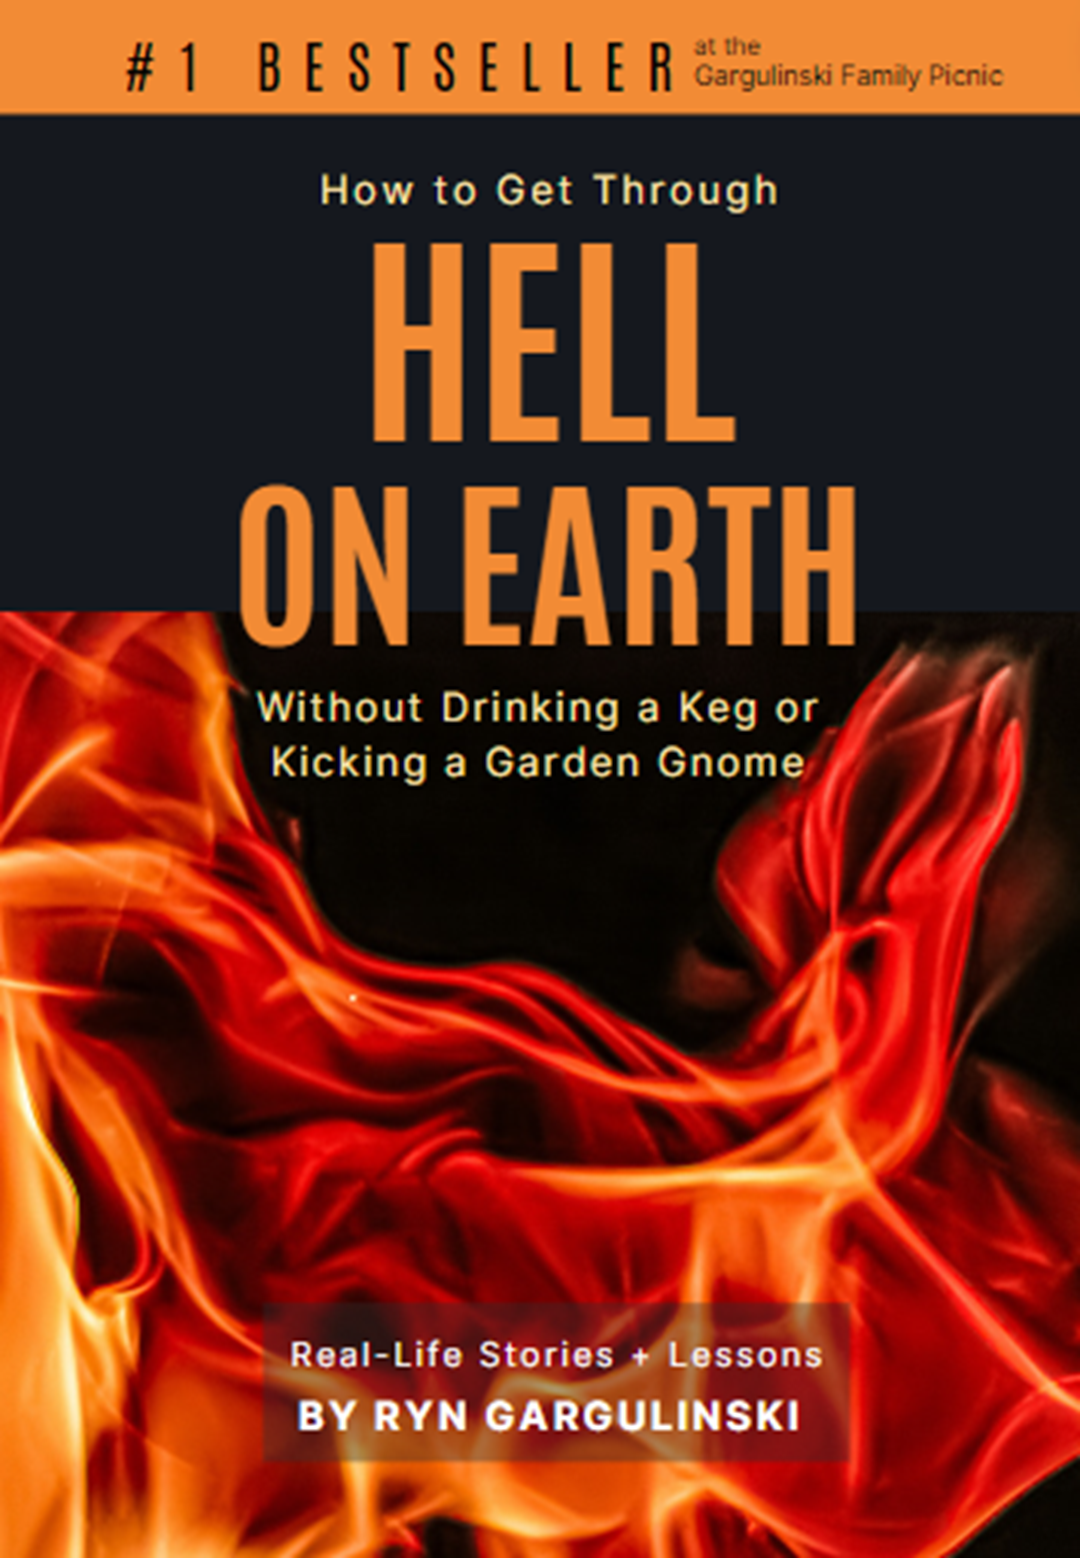 How to Get Through Hell on Earth Without Drinking a Keg or Kicking a Garden Gnome